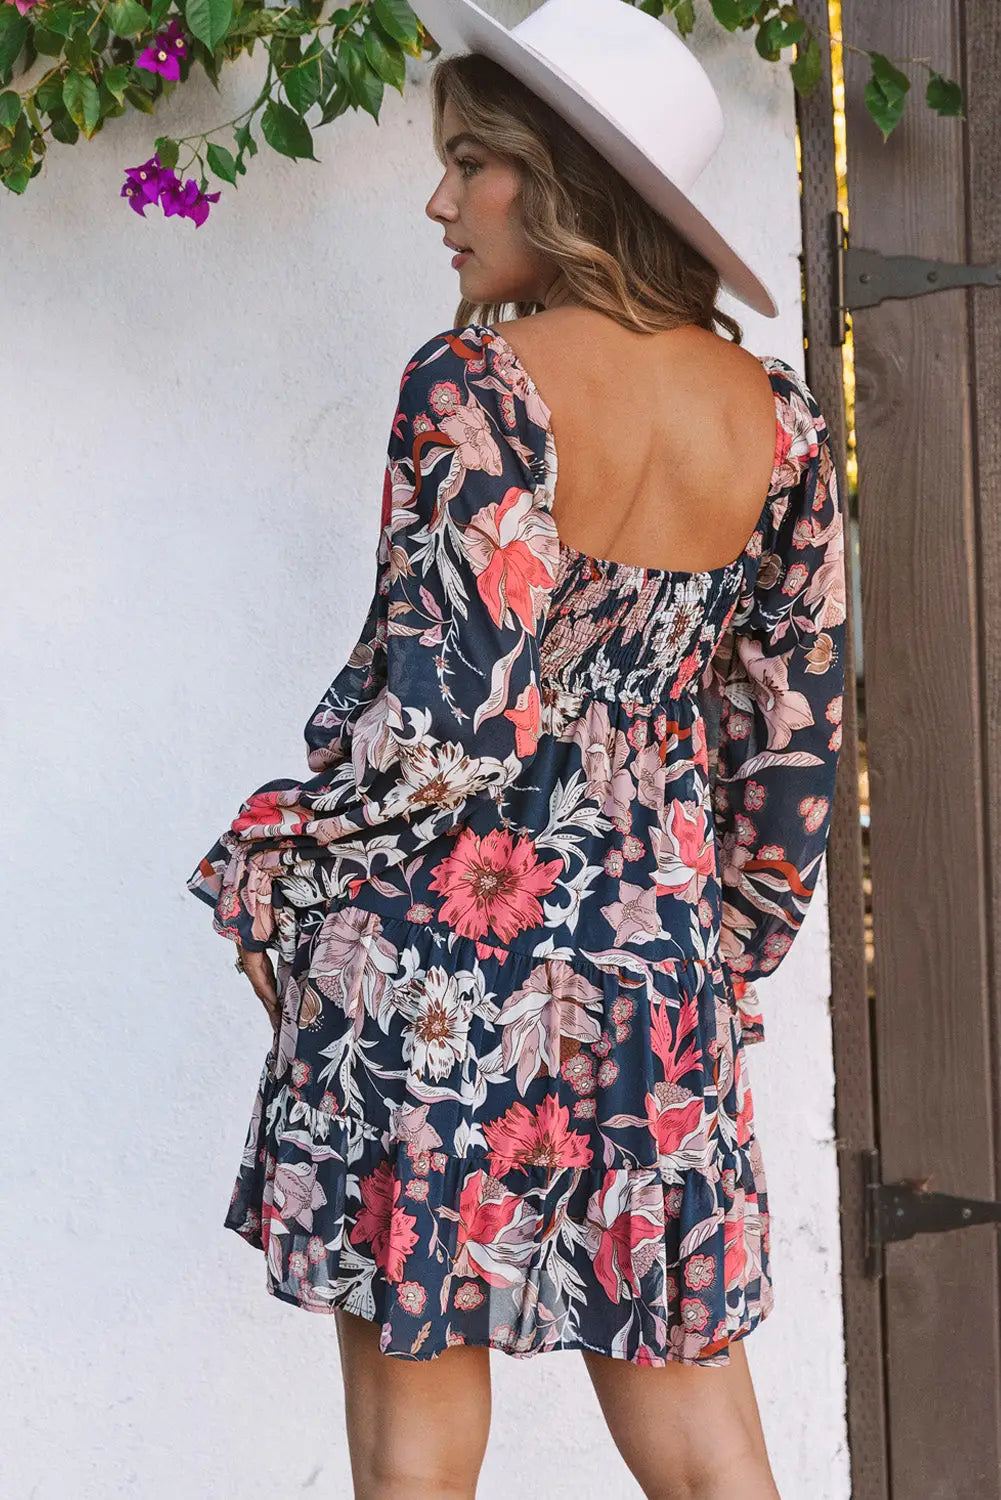 Floral mini dress - tiered long puff sleeve - dresses